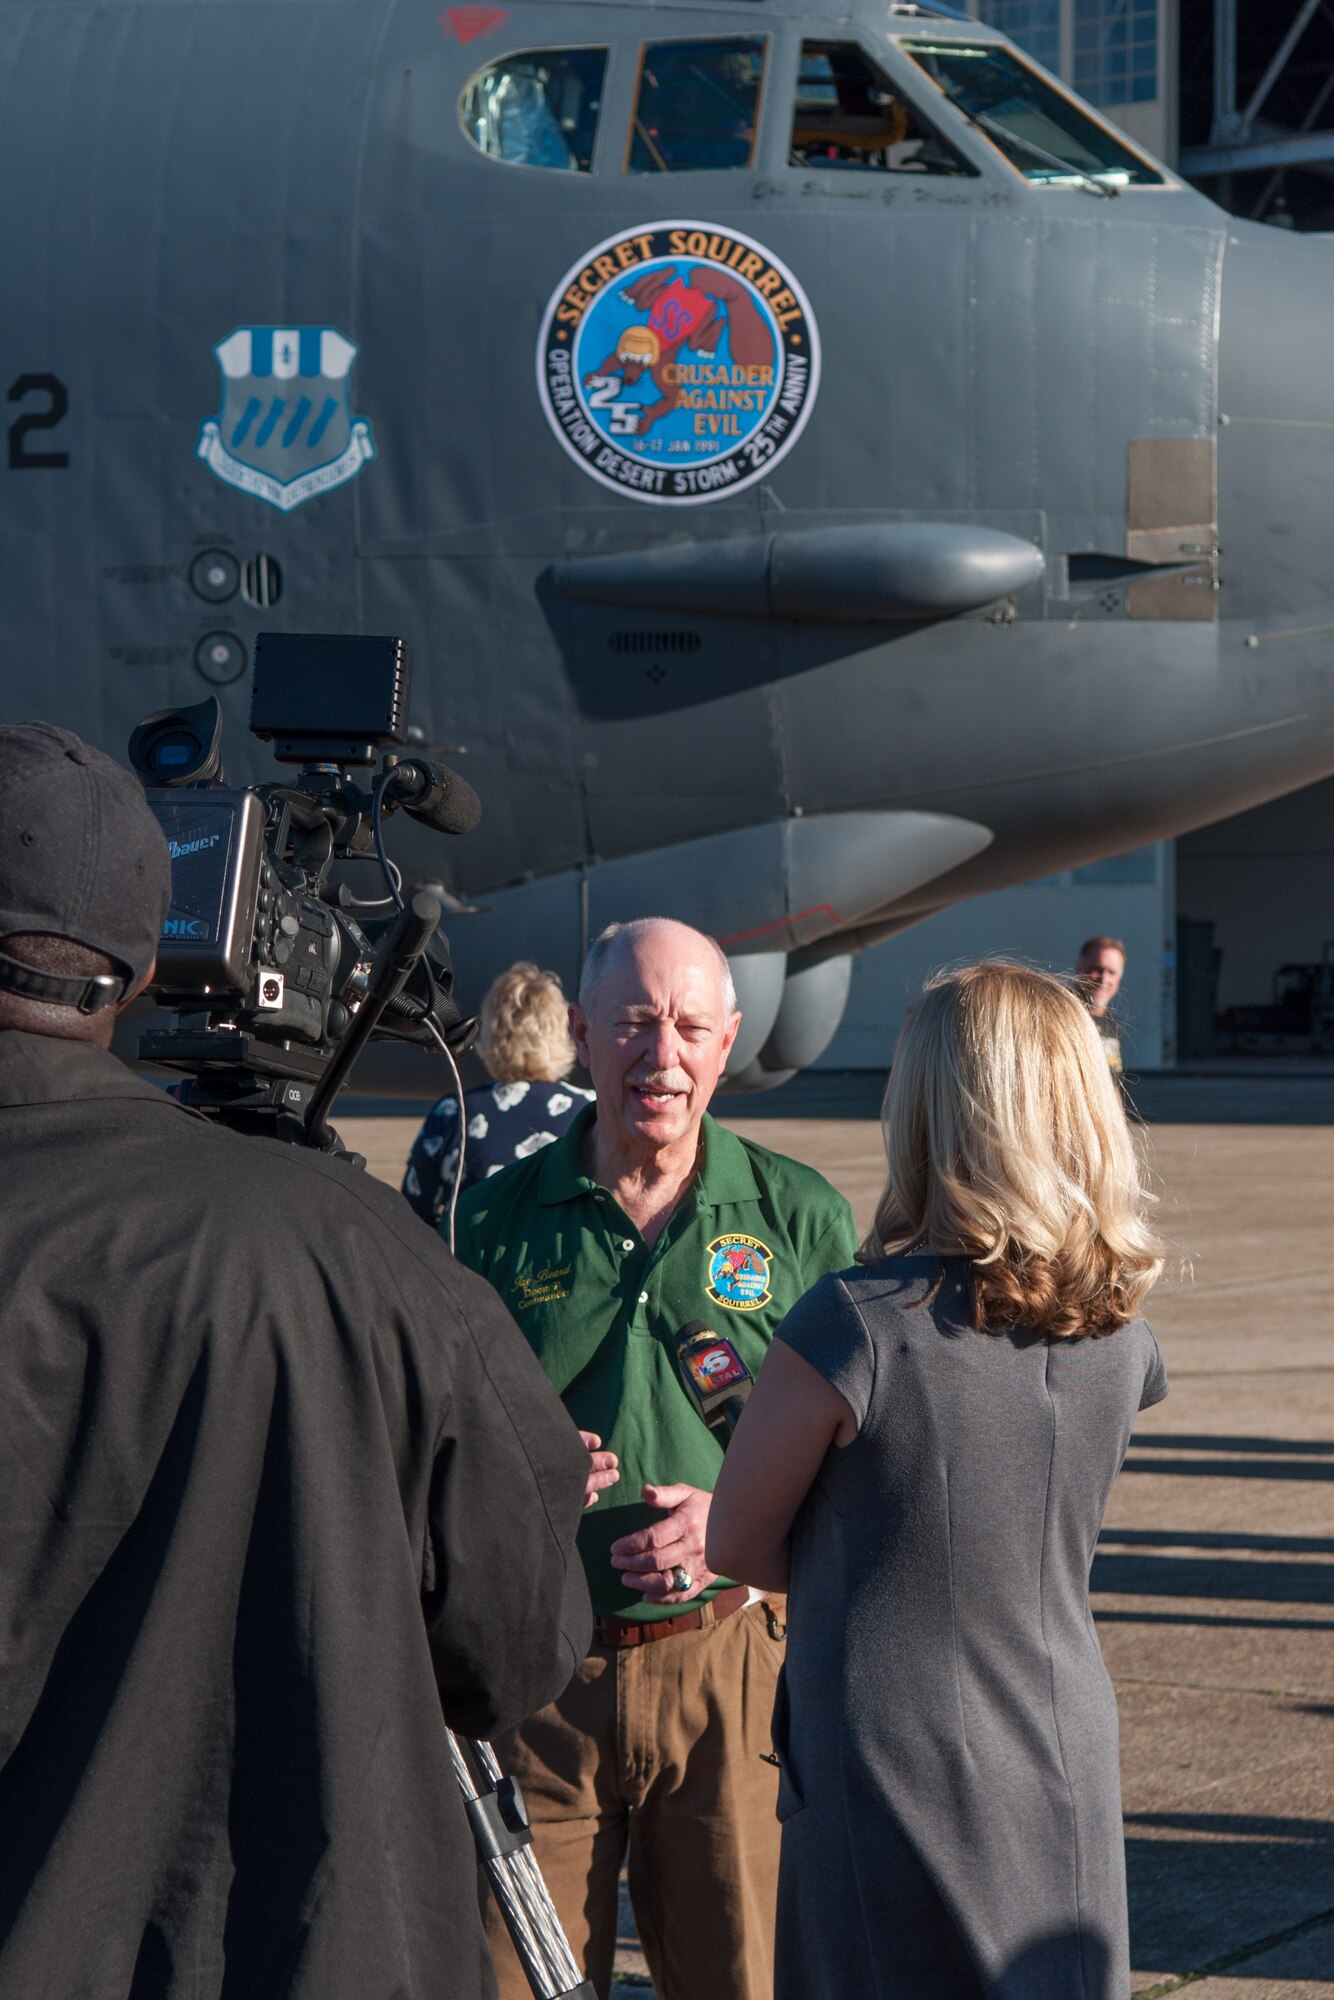 John Beard, the mission commander of Operation Senior Surprise, aka “Secret Squirrel,” speaks with a local news reporter on Barksdale Air Force Base, La. on Jan. 15, 2016. Beard reunited with his fellow Airmen for the 25th anniversary of the mission that kicked off Operation Desert Storm. During the 35-hour long mission, 35 cruise missiles were launched from seven B-52s targeting strategic and tactical targets in Iraq. (U.S. Air Force photo by Master Sgt. Dachelle Melville/Released)